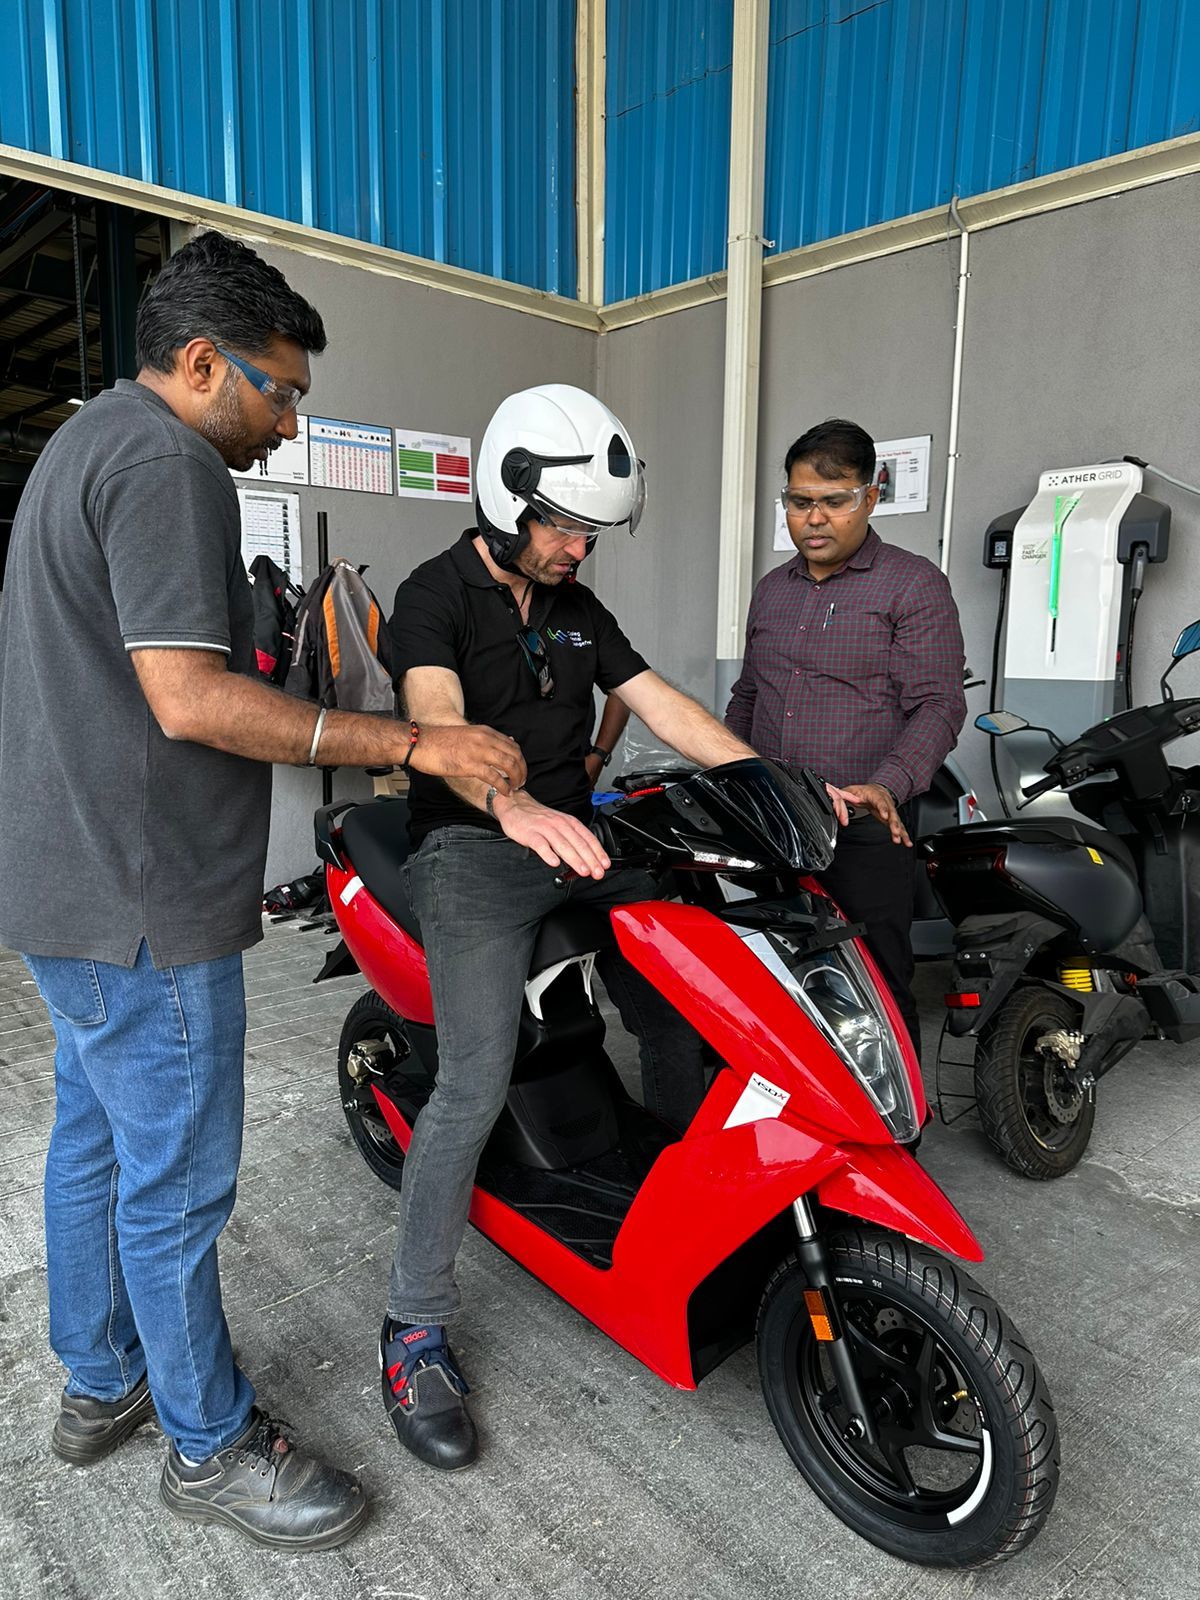 Coleg Llandrillo lecturer Paul Griffith and NPTC lecturer Will Davies tries an electric bike during the trip to India